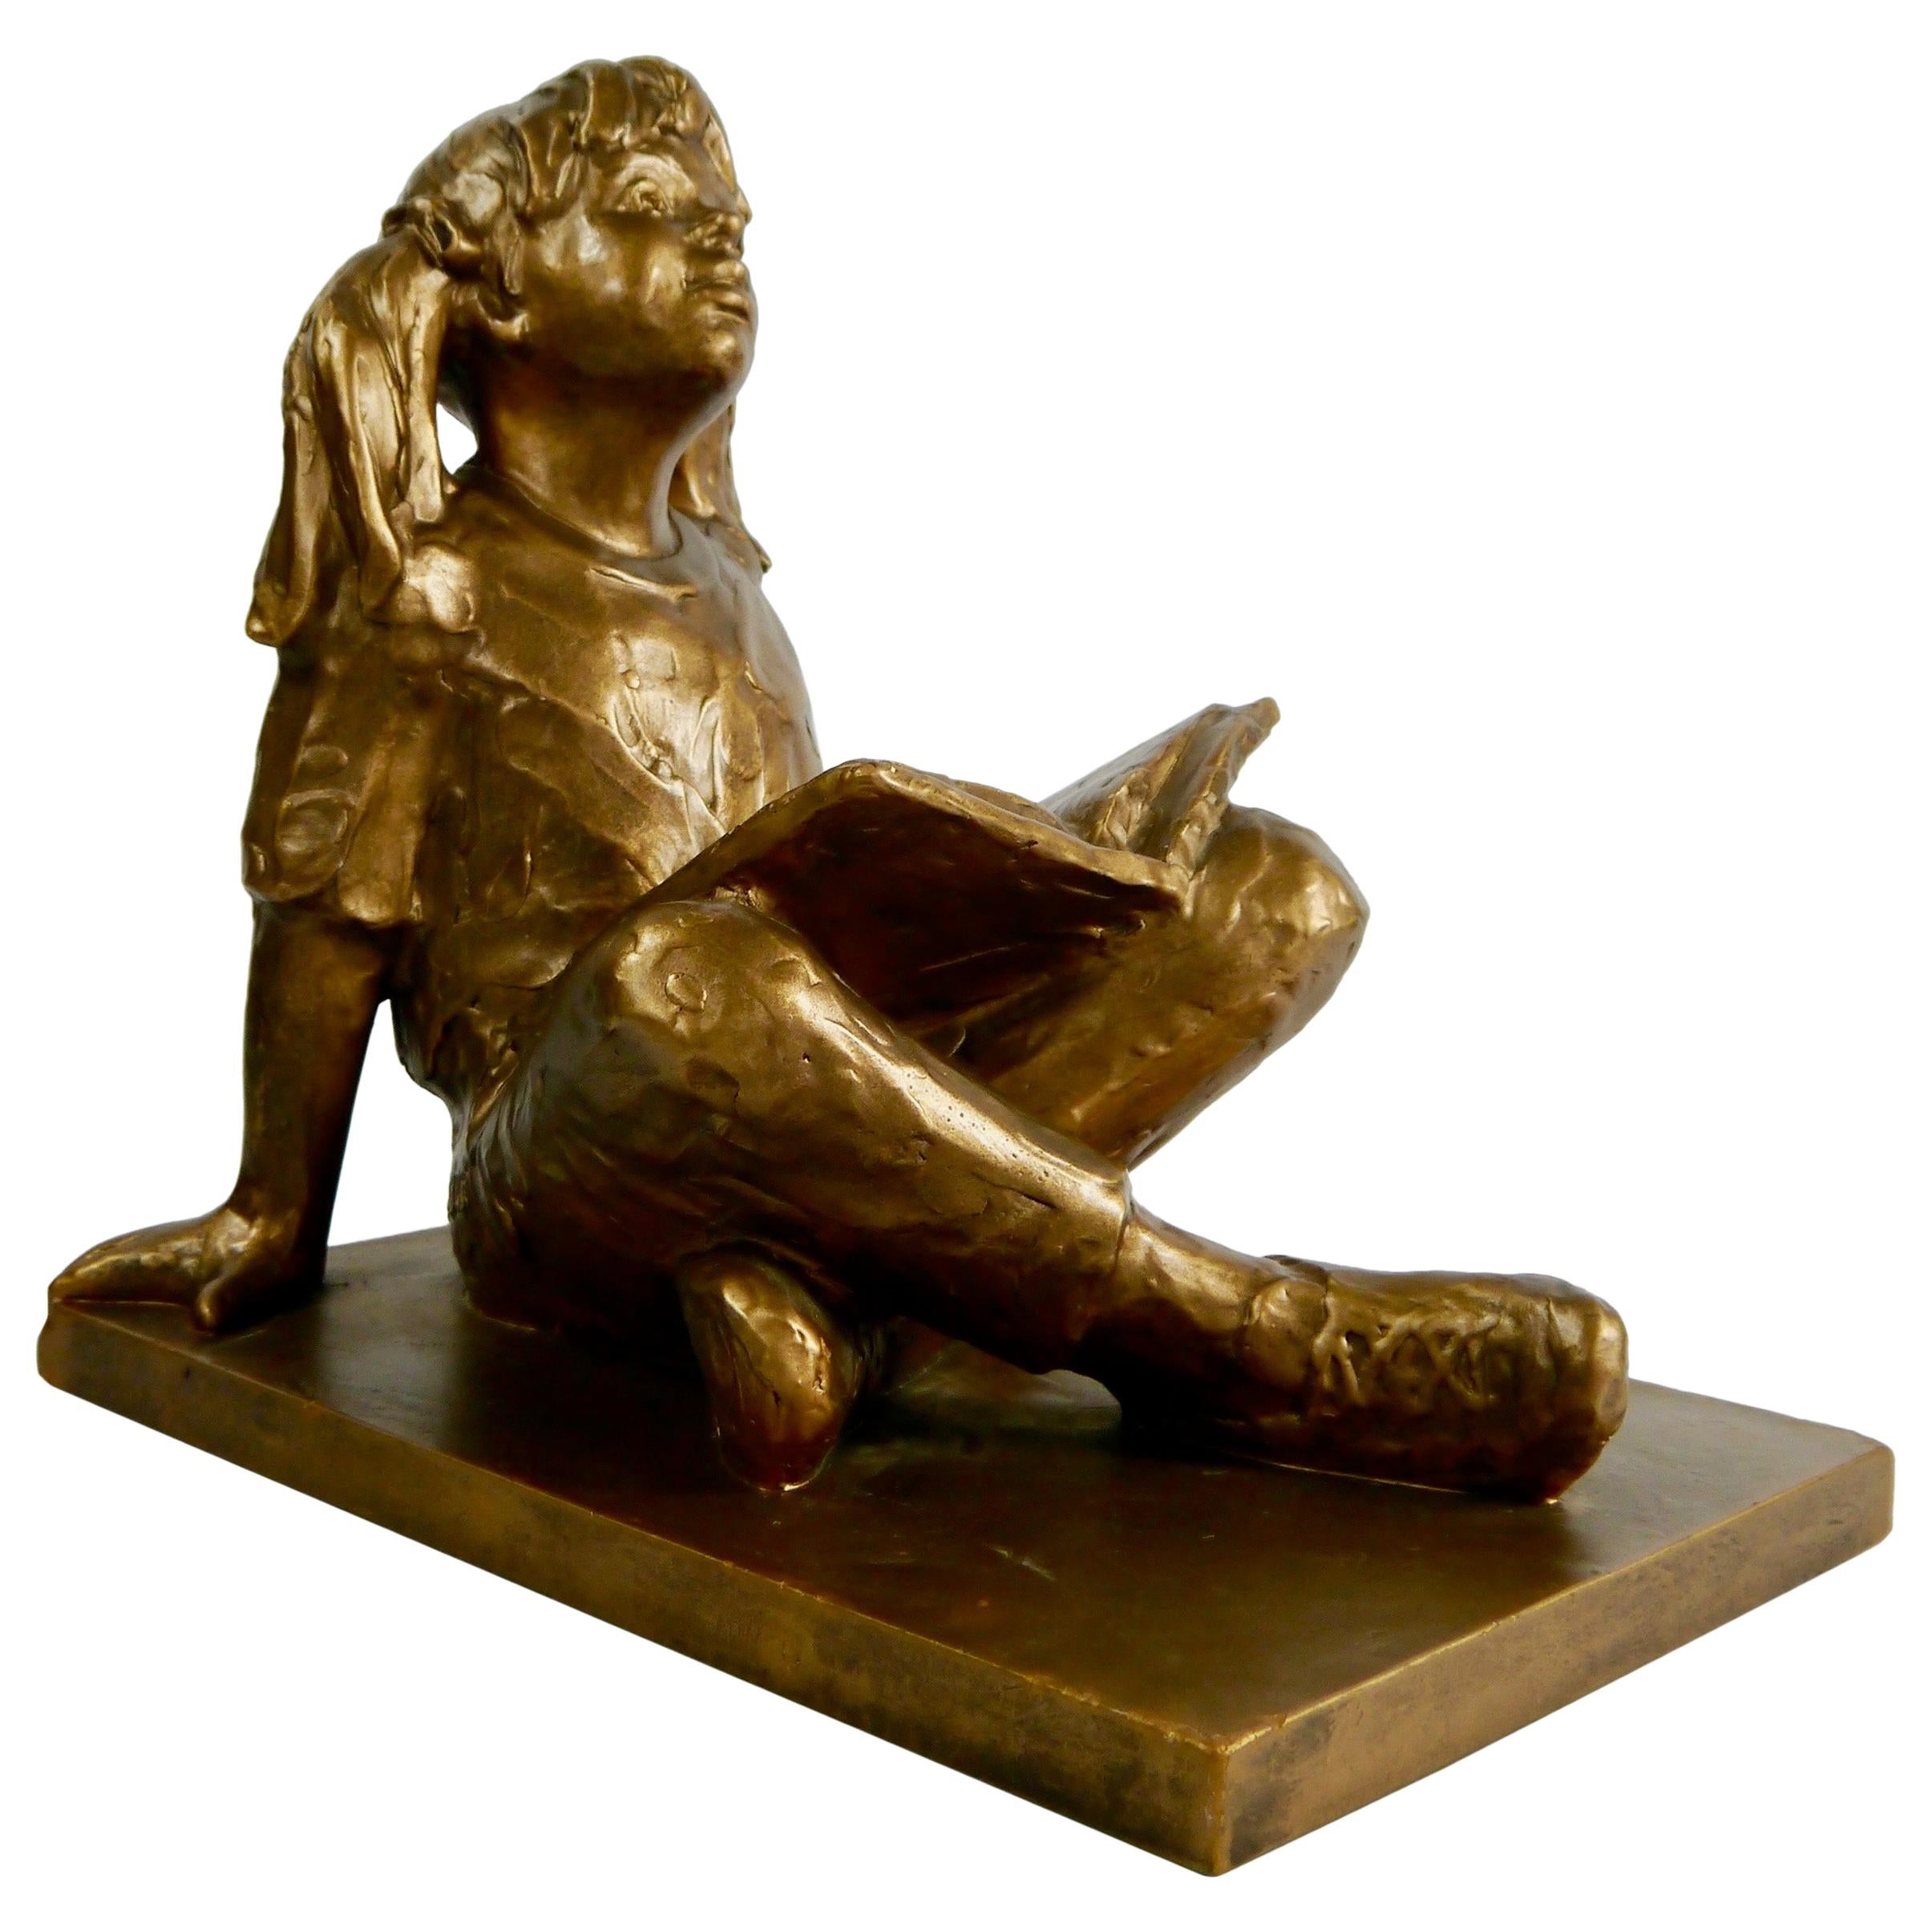 Gary Lee Price Bronze Reading Ponytail Girl Sculpture, from "Story Time" Series